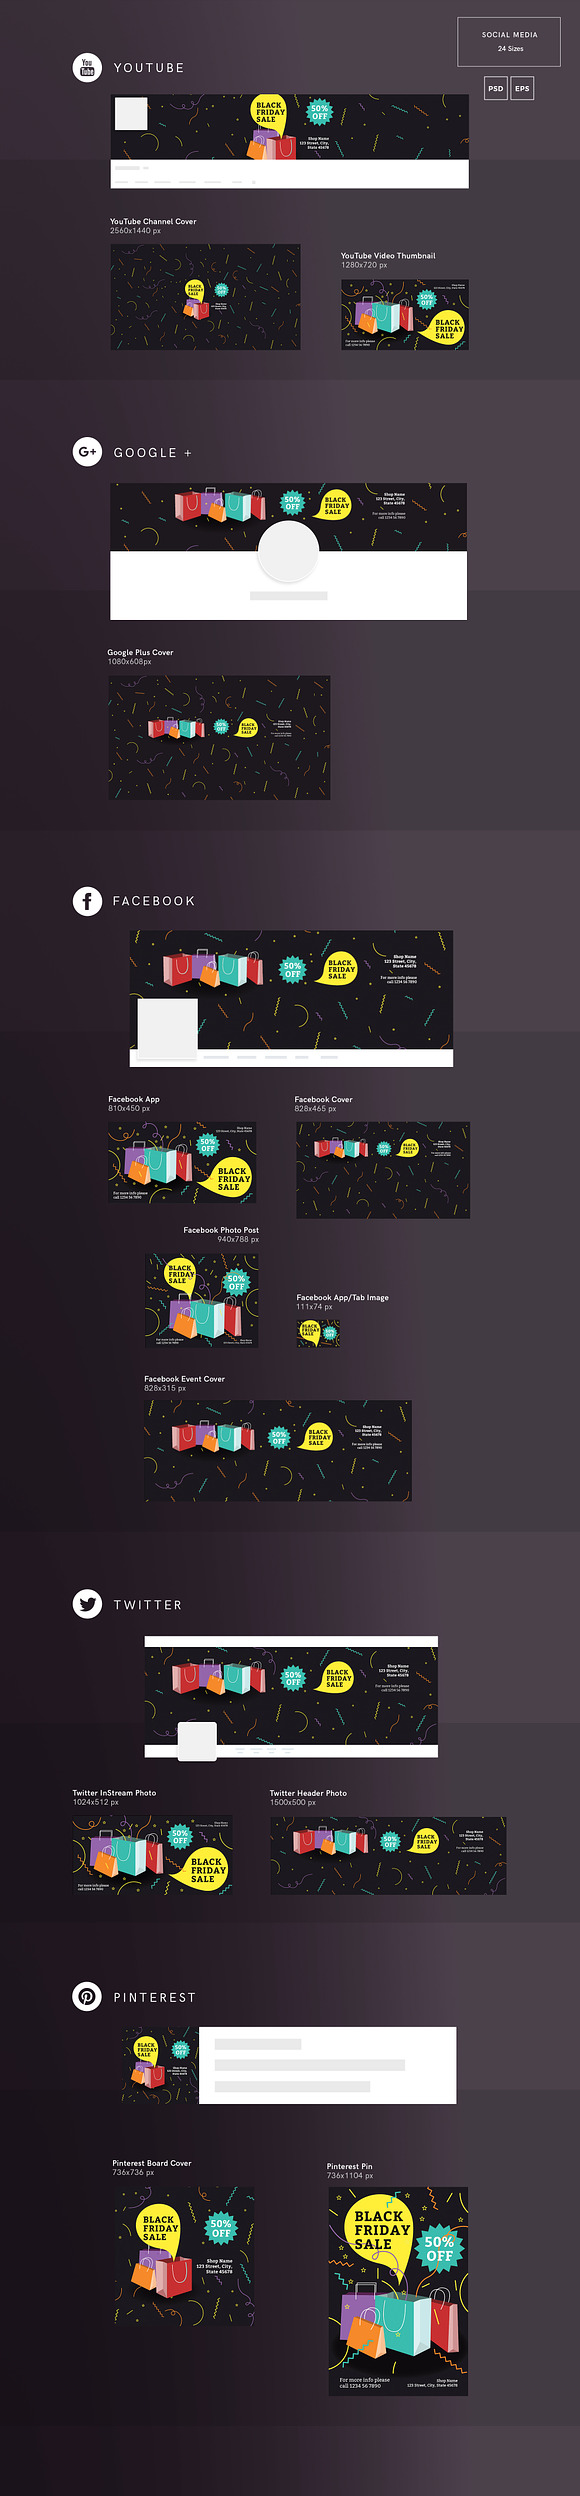 Social Media Pack | Black Friday in Social Media Templates - product preview 2